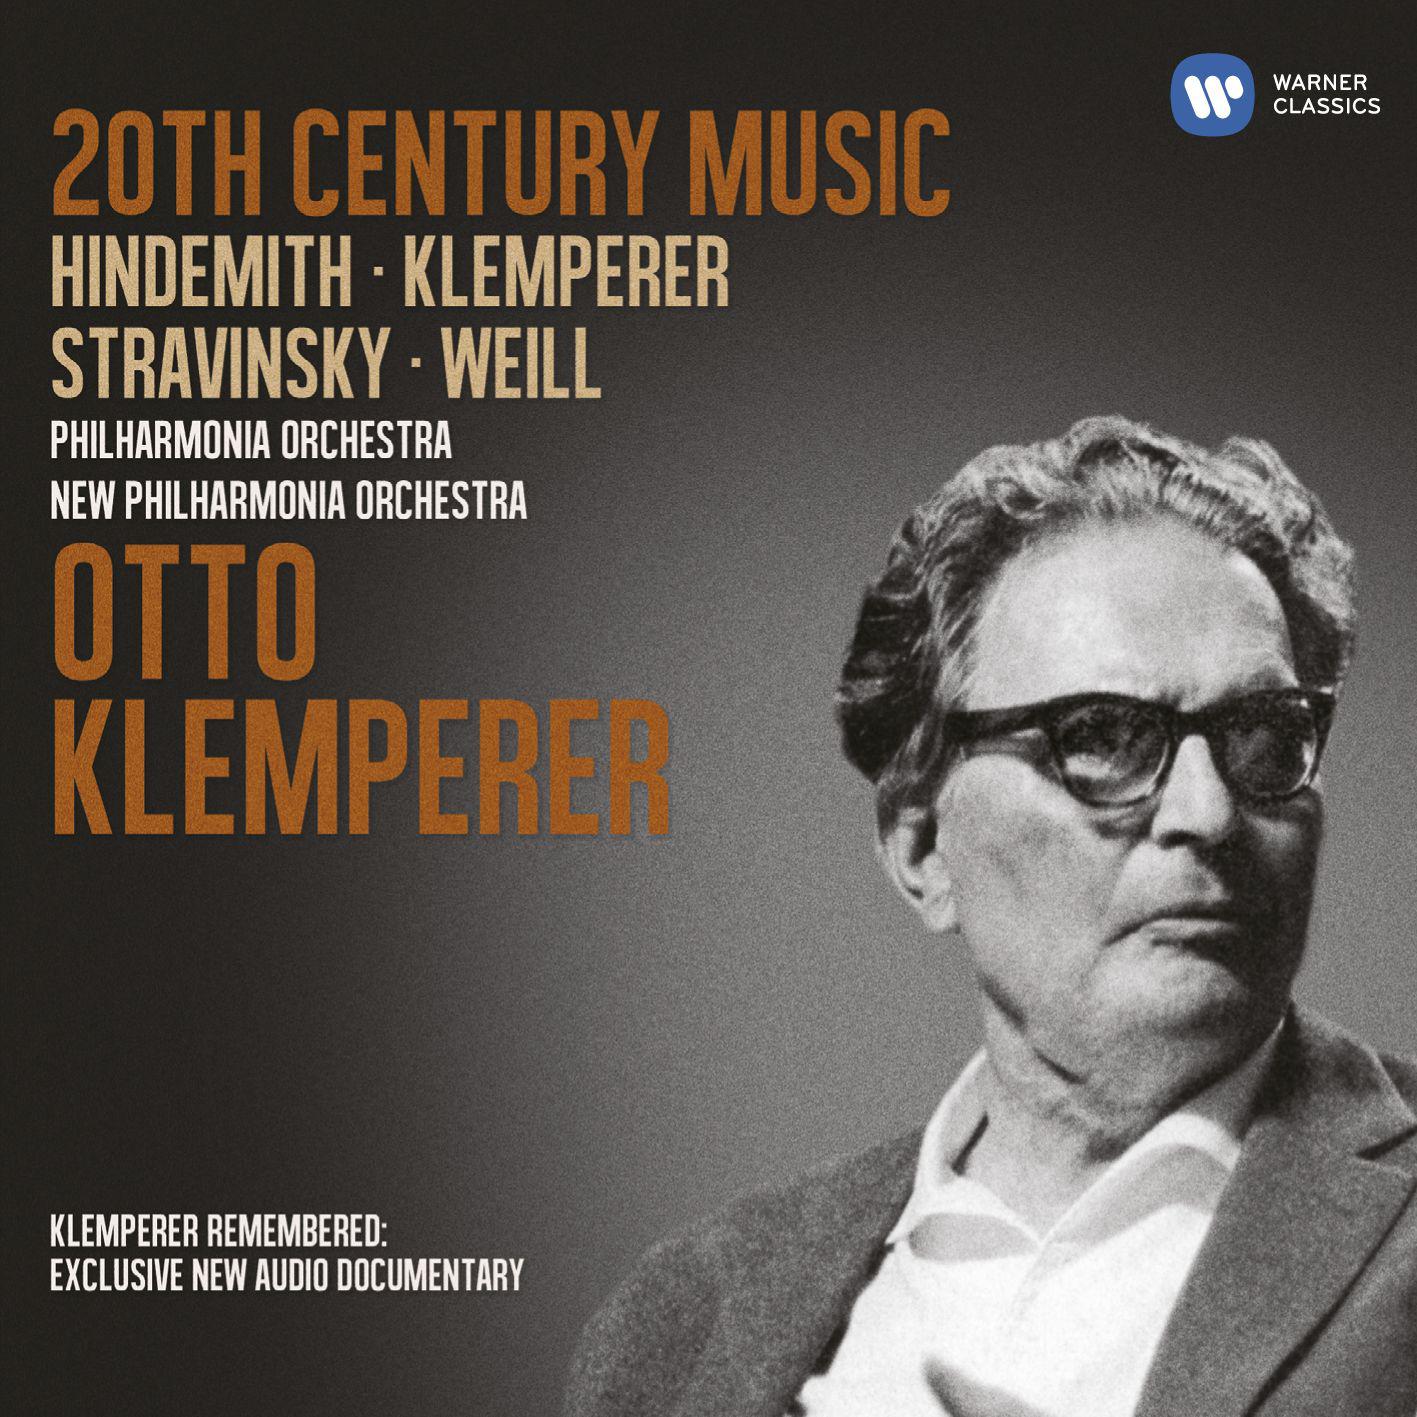 Otto Klemperer:A Biographical Memoir: Style and Tempi in the mid 1950s